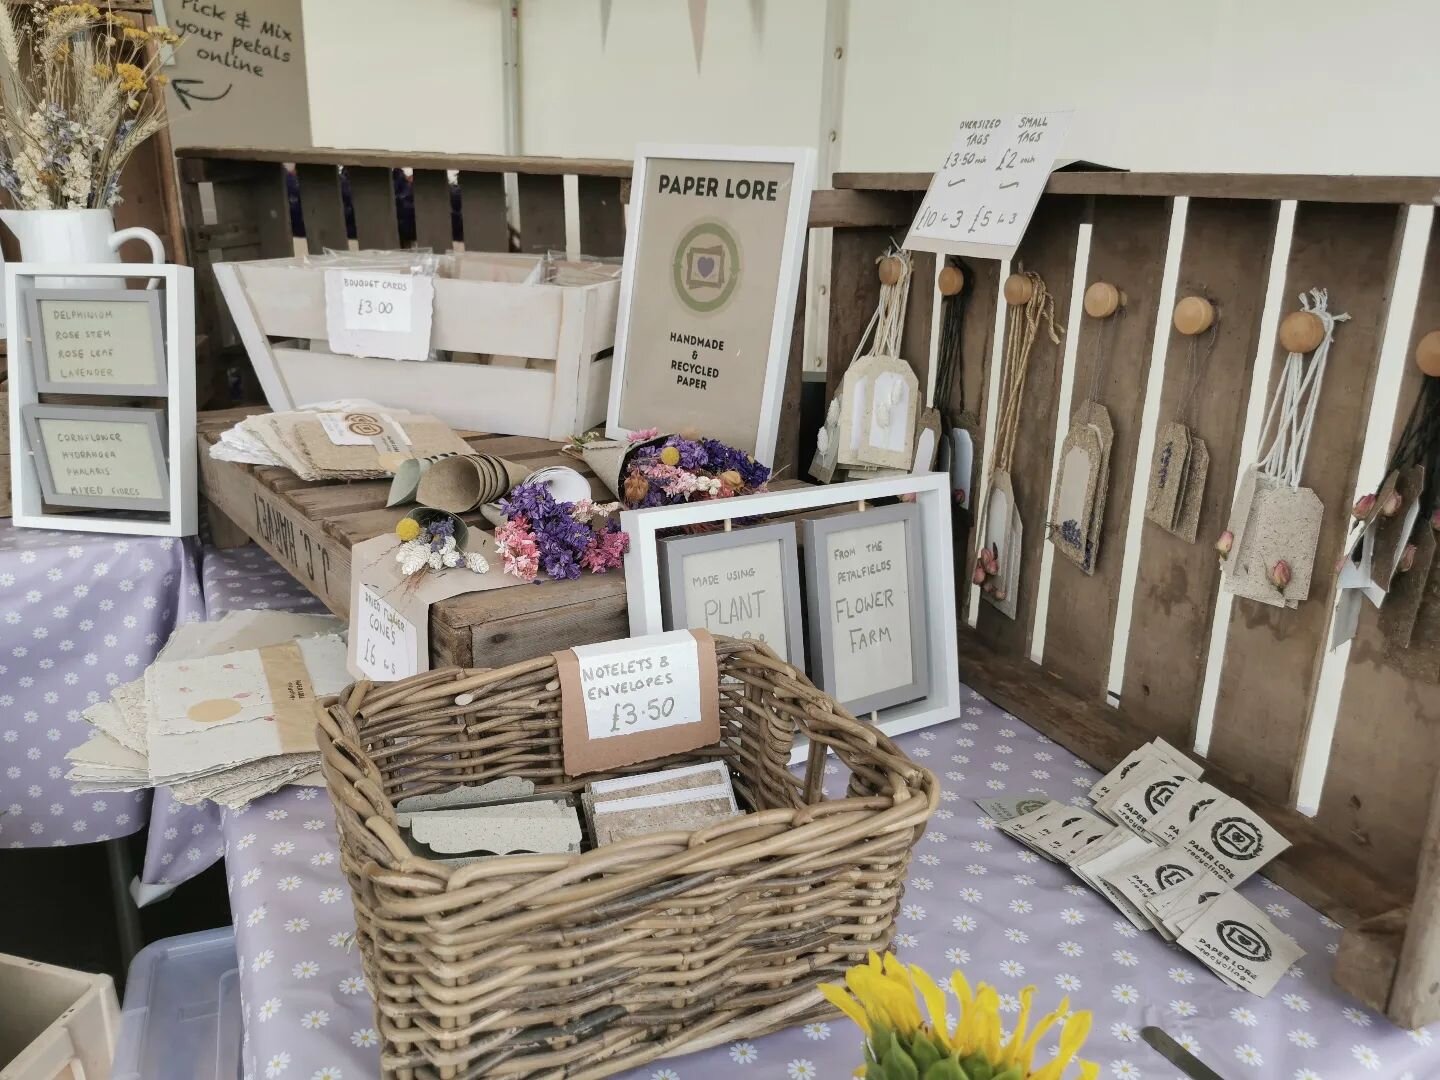 A very rainy first Saturday - and we are all set up! People are embracing our summer and arriving to enjoy the flower fields! Paper Lore is all set up and ready to chat to people about turning flower farm waste into paper - enjoy a dry moment in our 